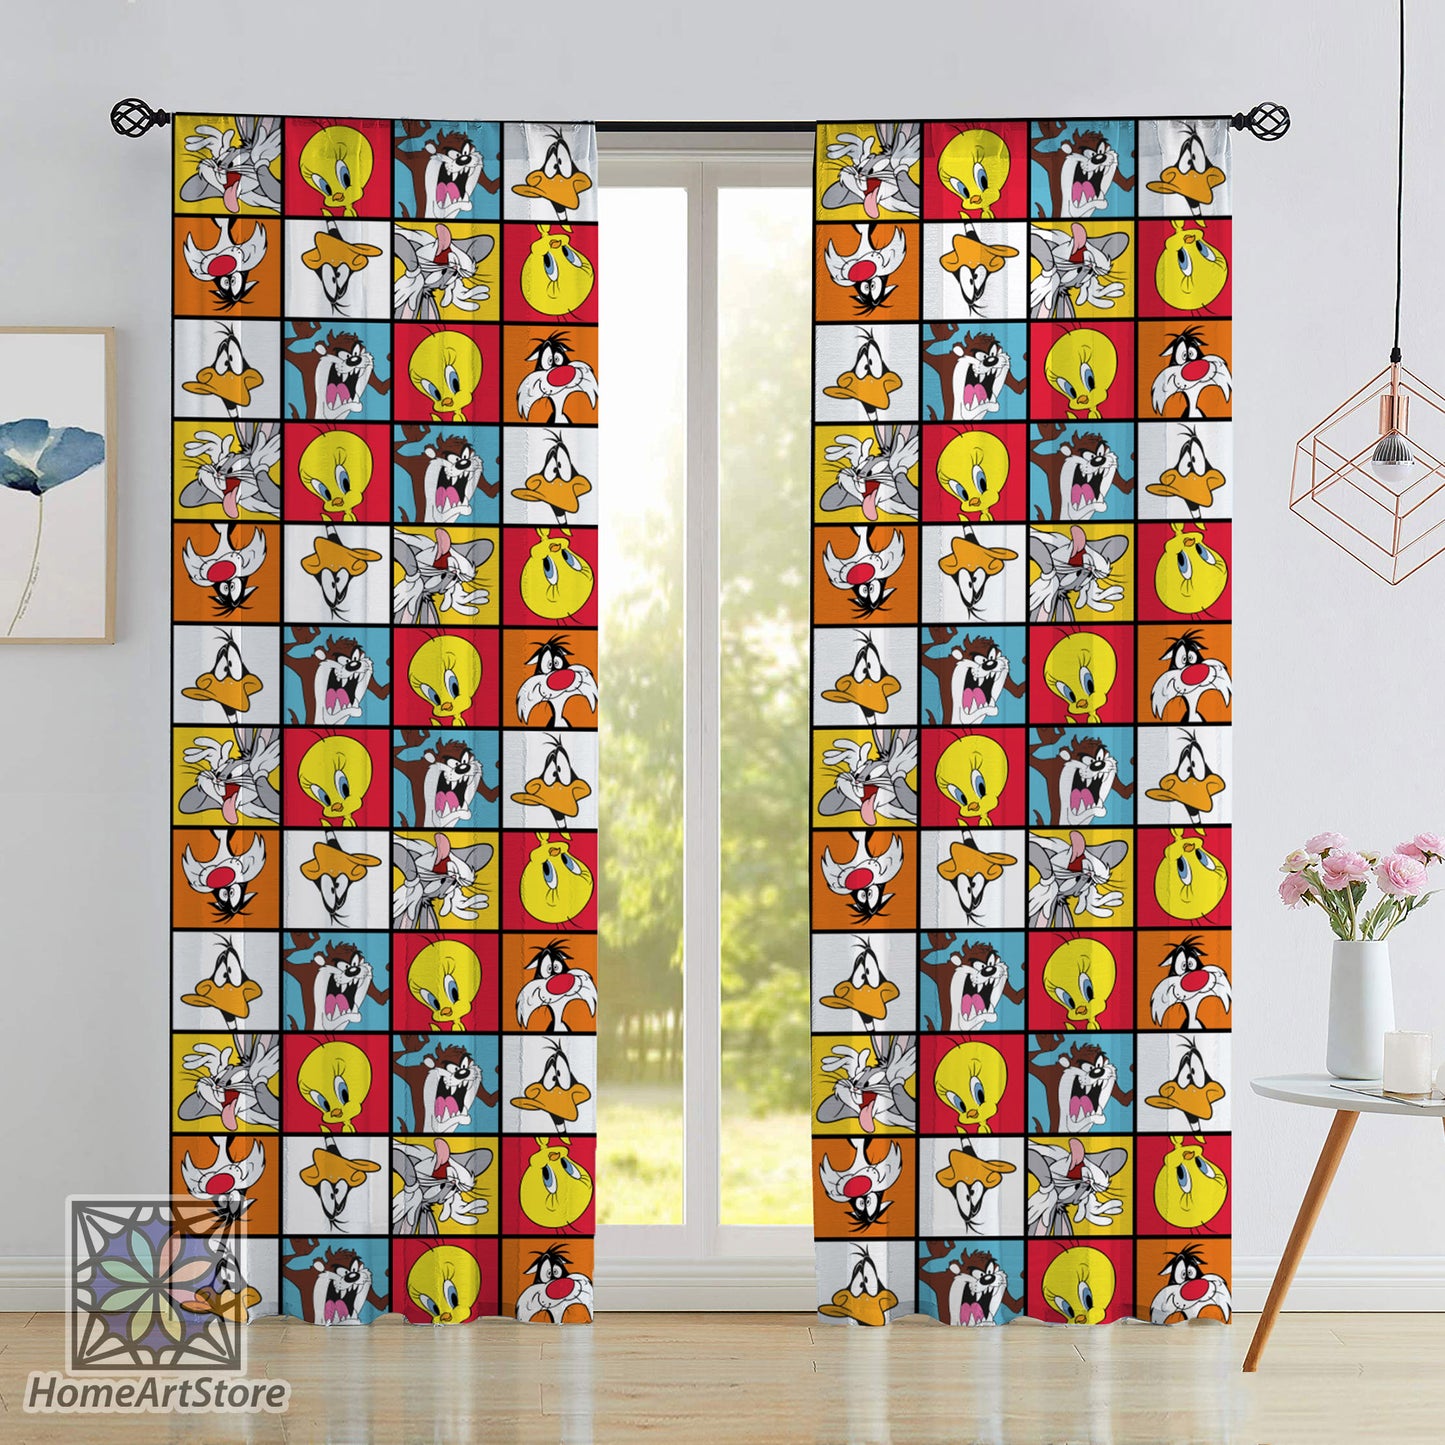 Bugs Bunny Curtain, Comic Cartoon Character Collage Curtain, Colorful Kids Room Curtain, Baby Gift